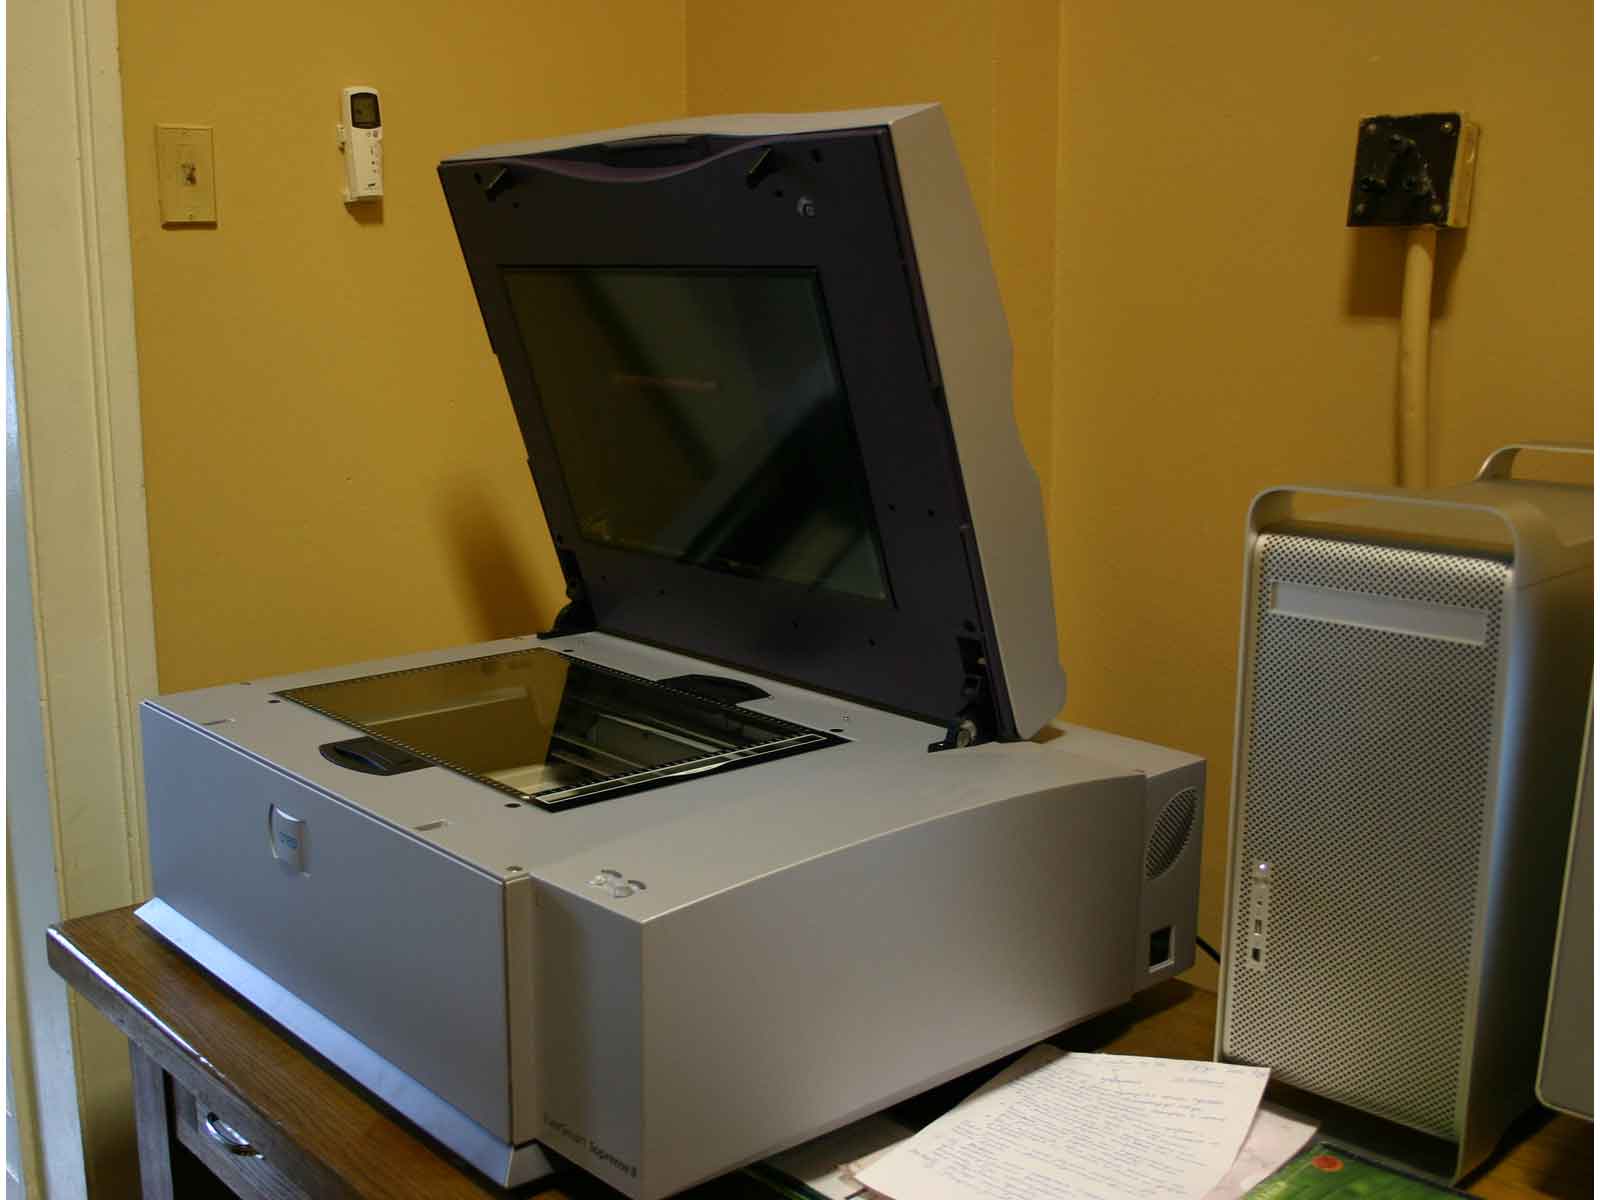 One of the CREO scanners 